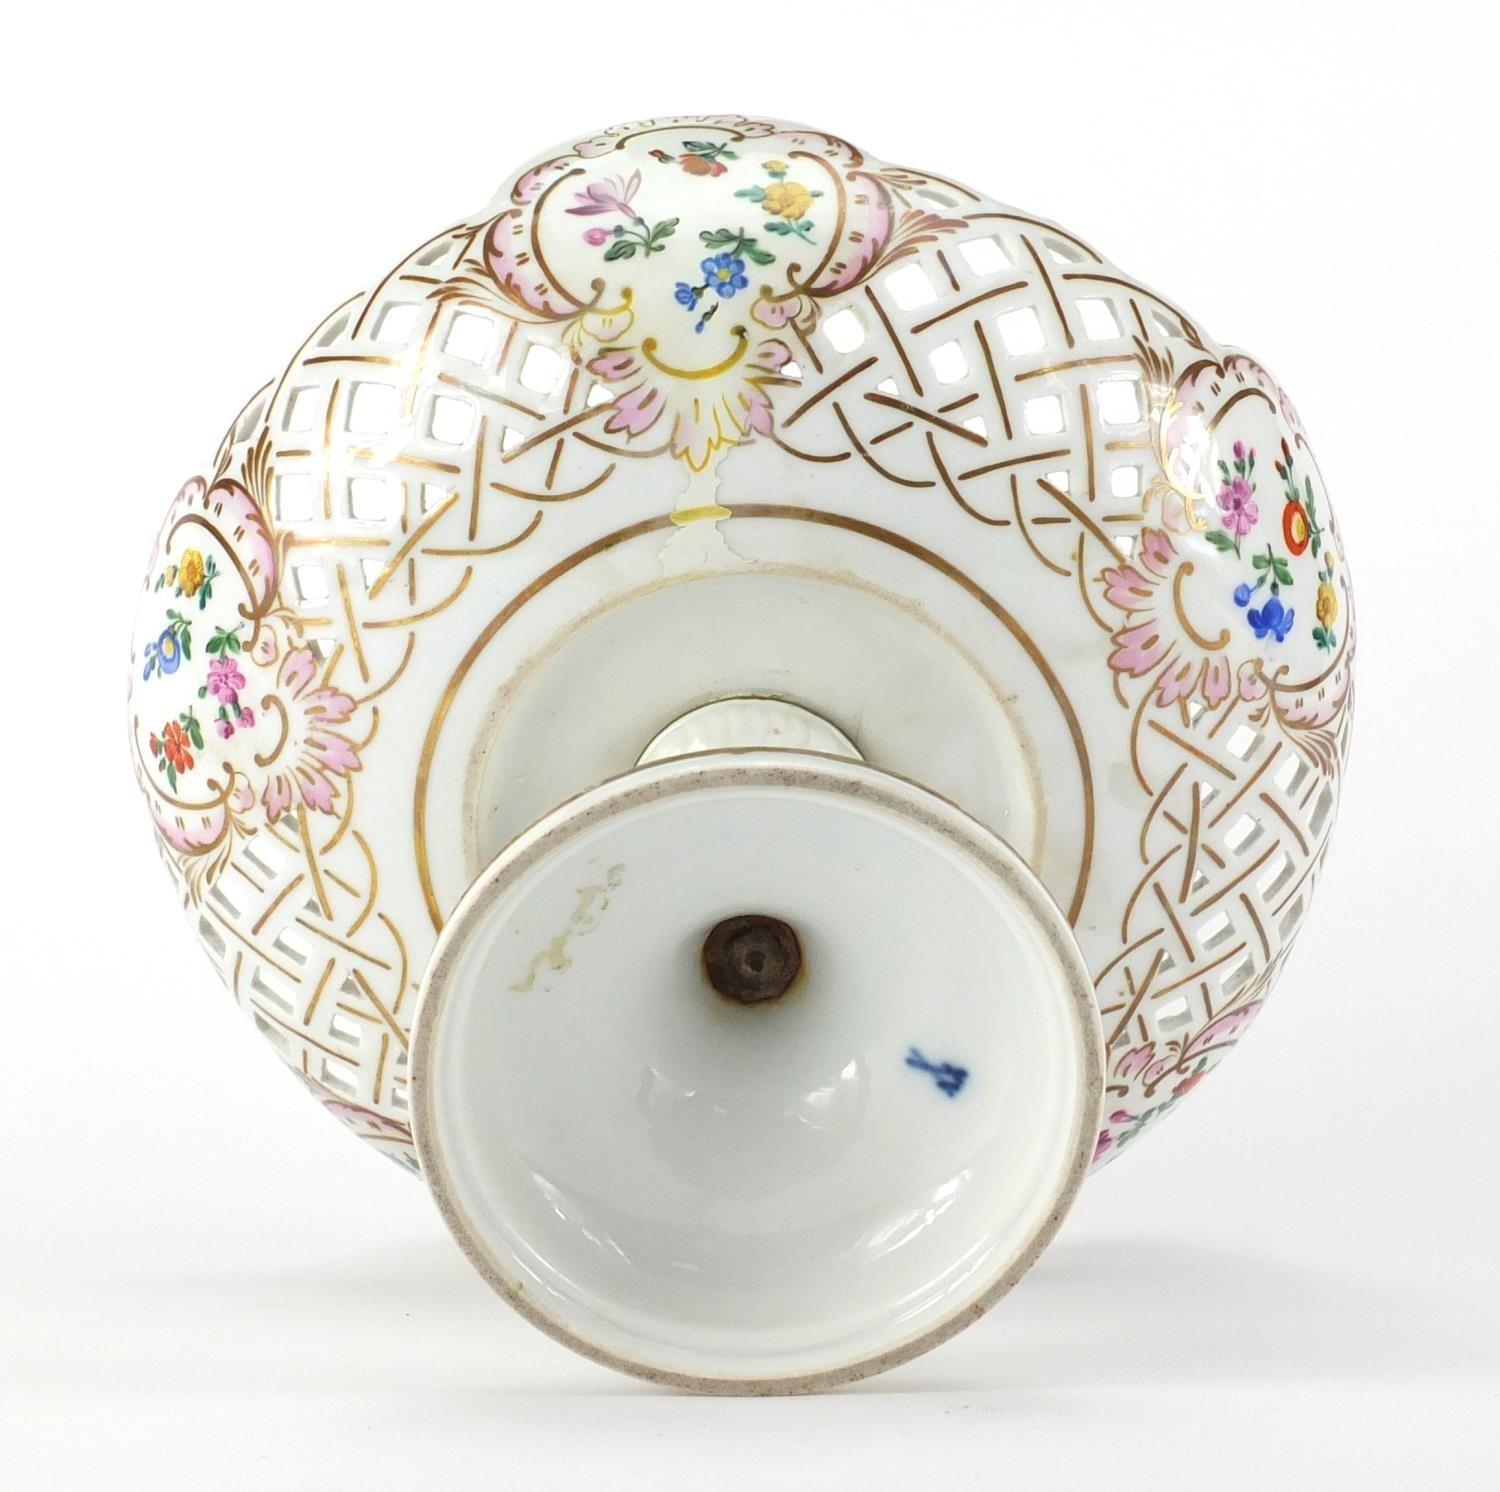 19th century Meissen porcelain tazza having a pierced rim, hand painted with stylised flowers, - Image 5 of 6